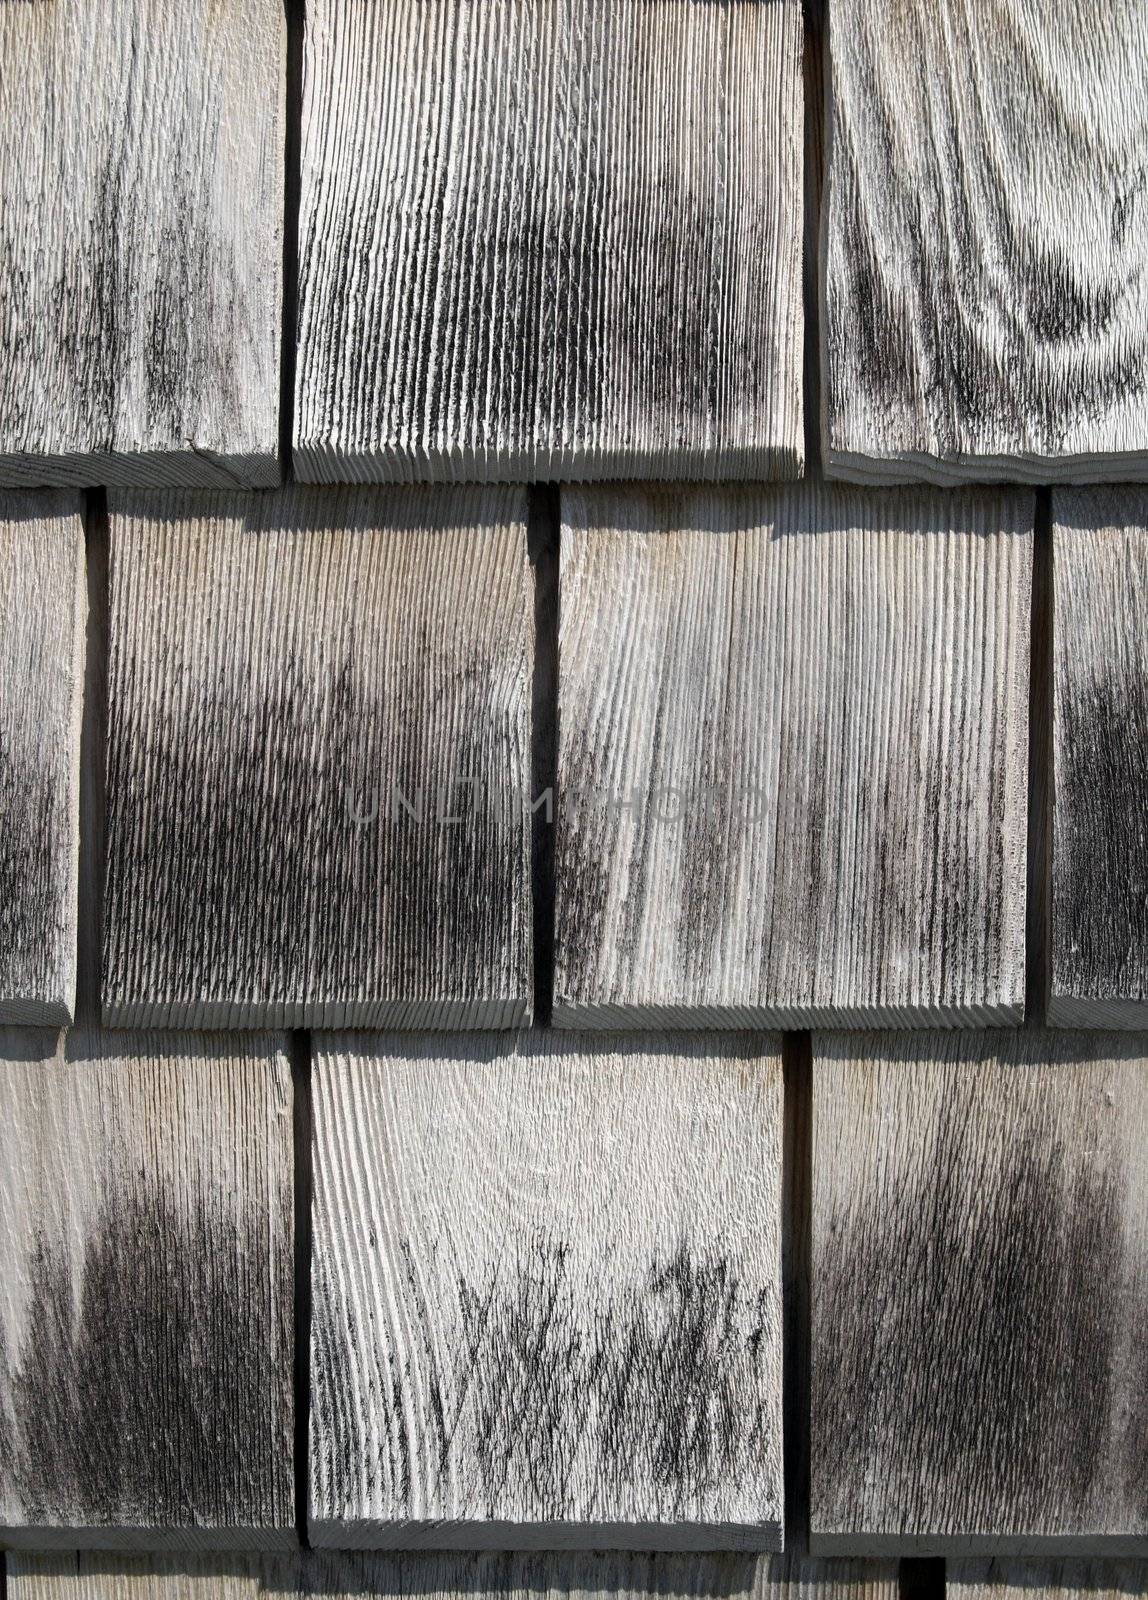 Texture of gray wooden tiles. Detail of a house wall.